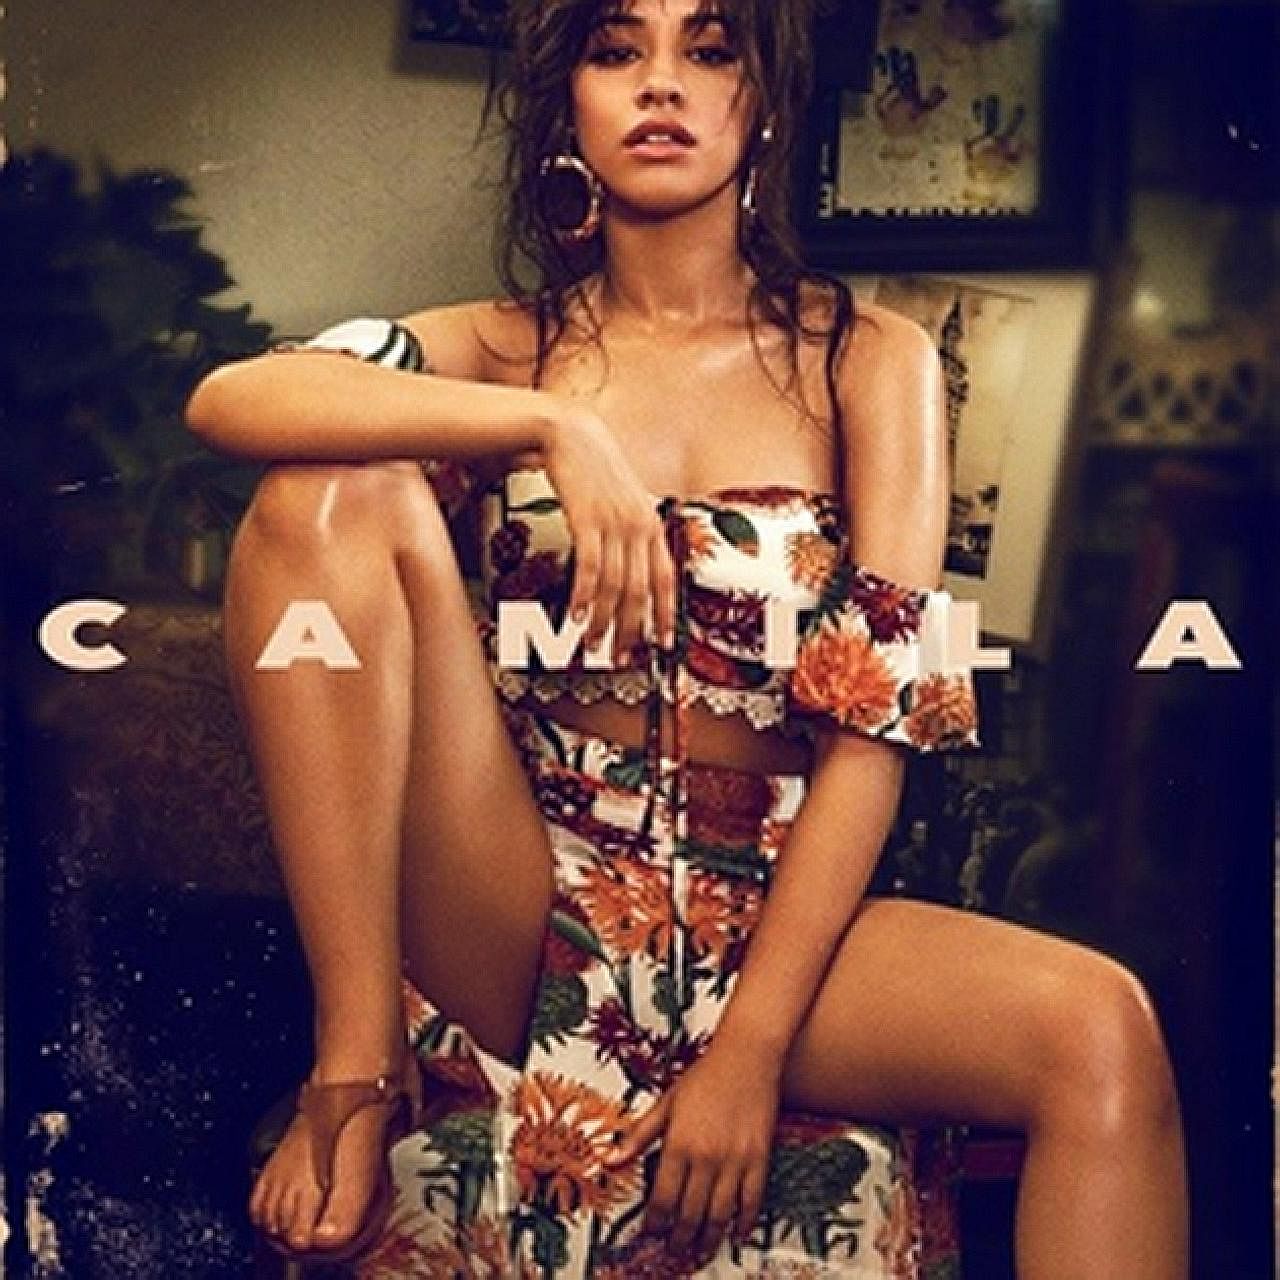 Camila Cabello scored the rare feat of having a No. 1 song, Havana, at the top of the Billboard singles charts, and a full-length album that shot to No. 1 on the Billboard album charts.